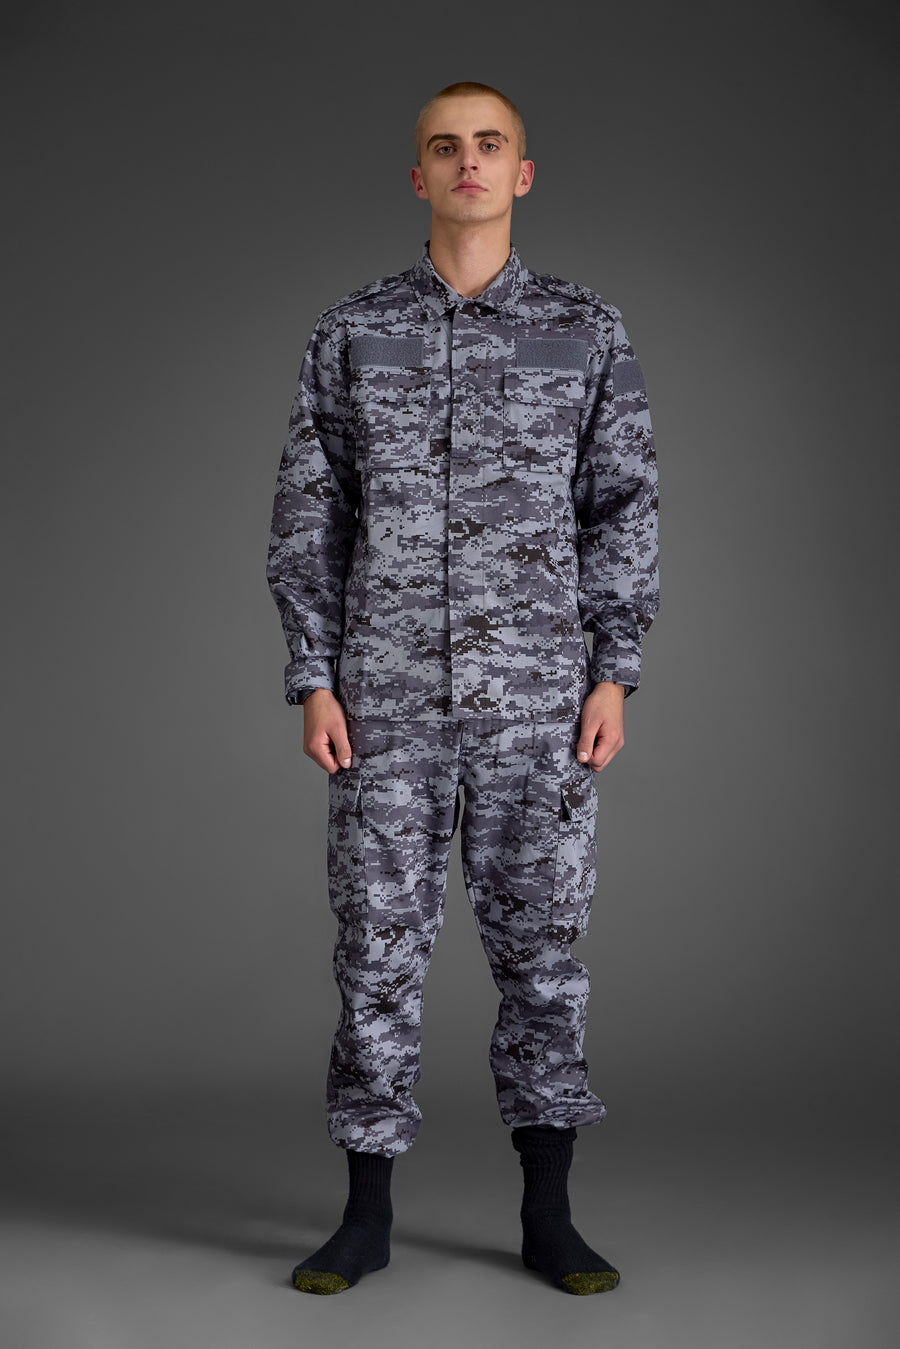 Grey Camouflage BDU Designed for Police Special Forces